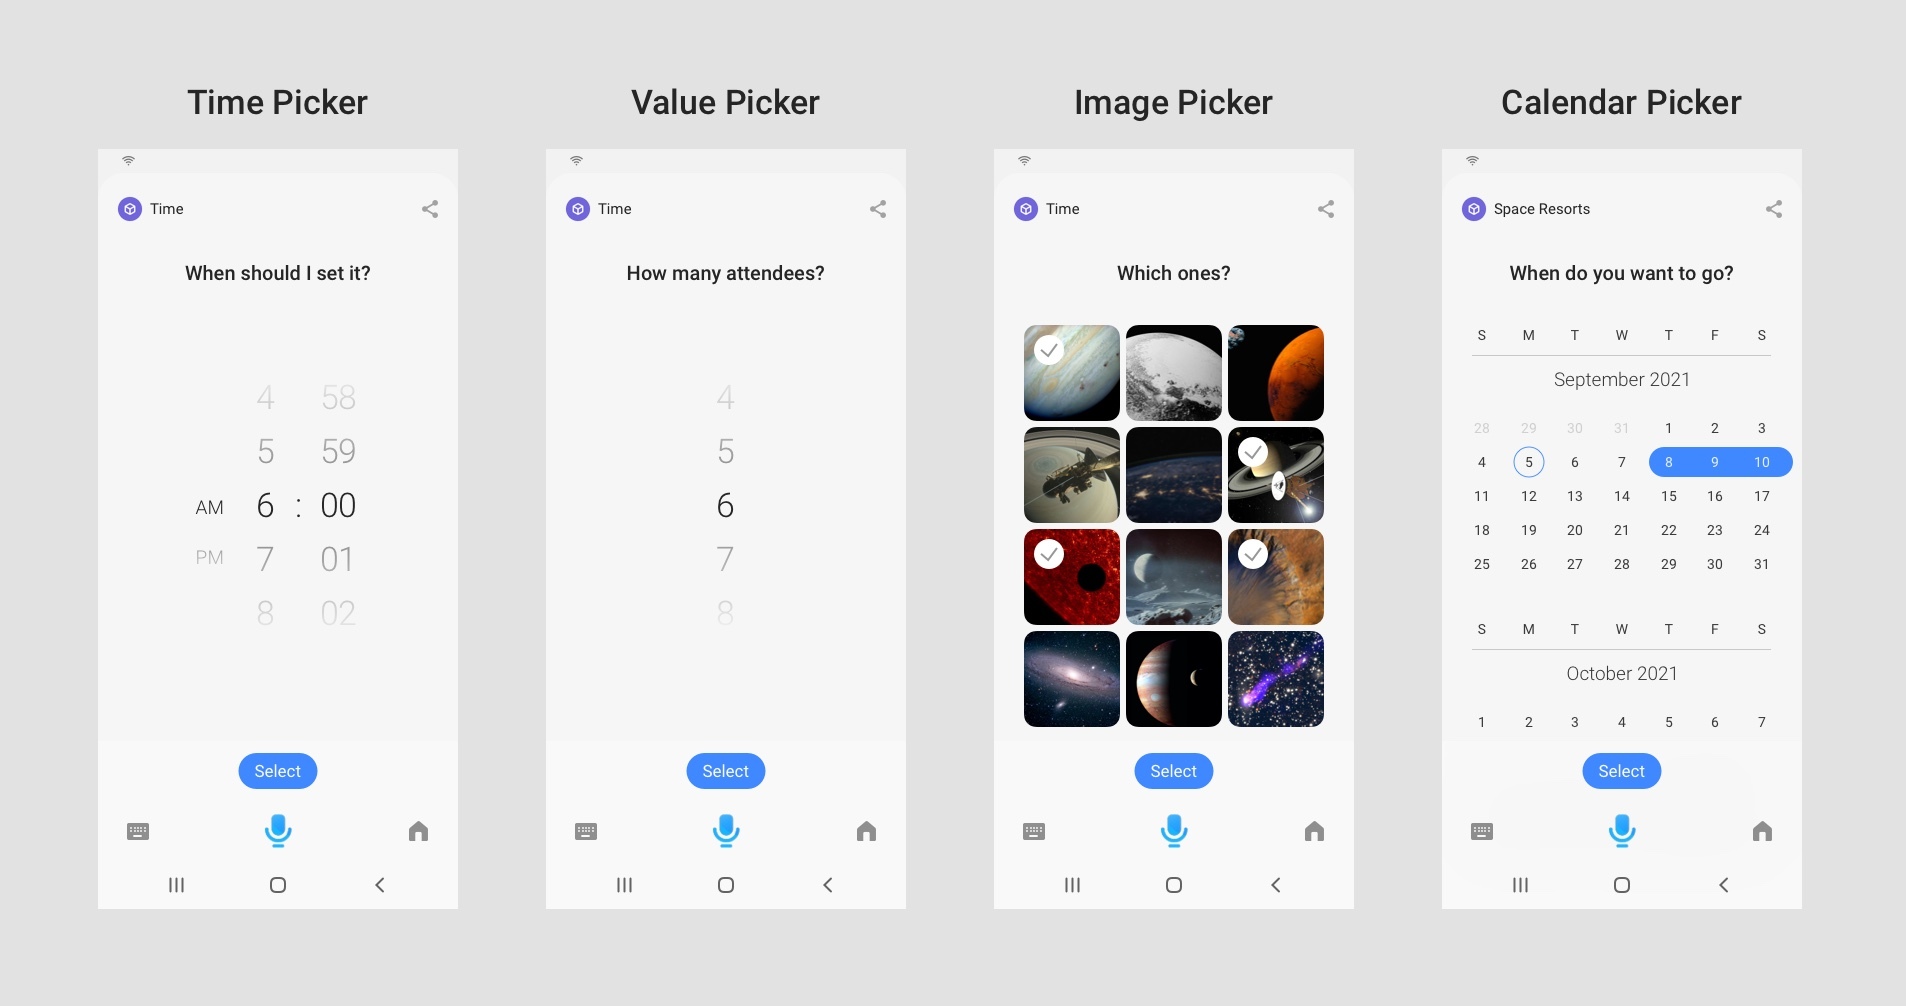 In addition to the date picker component, Bixby has a time picker, a generalized value picker (a scrolling list of values within a set range), an image picker, and a calendar picker that supports selecting ranges of dates.